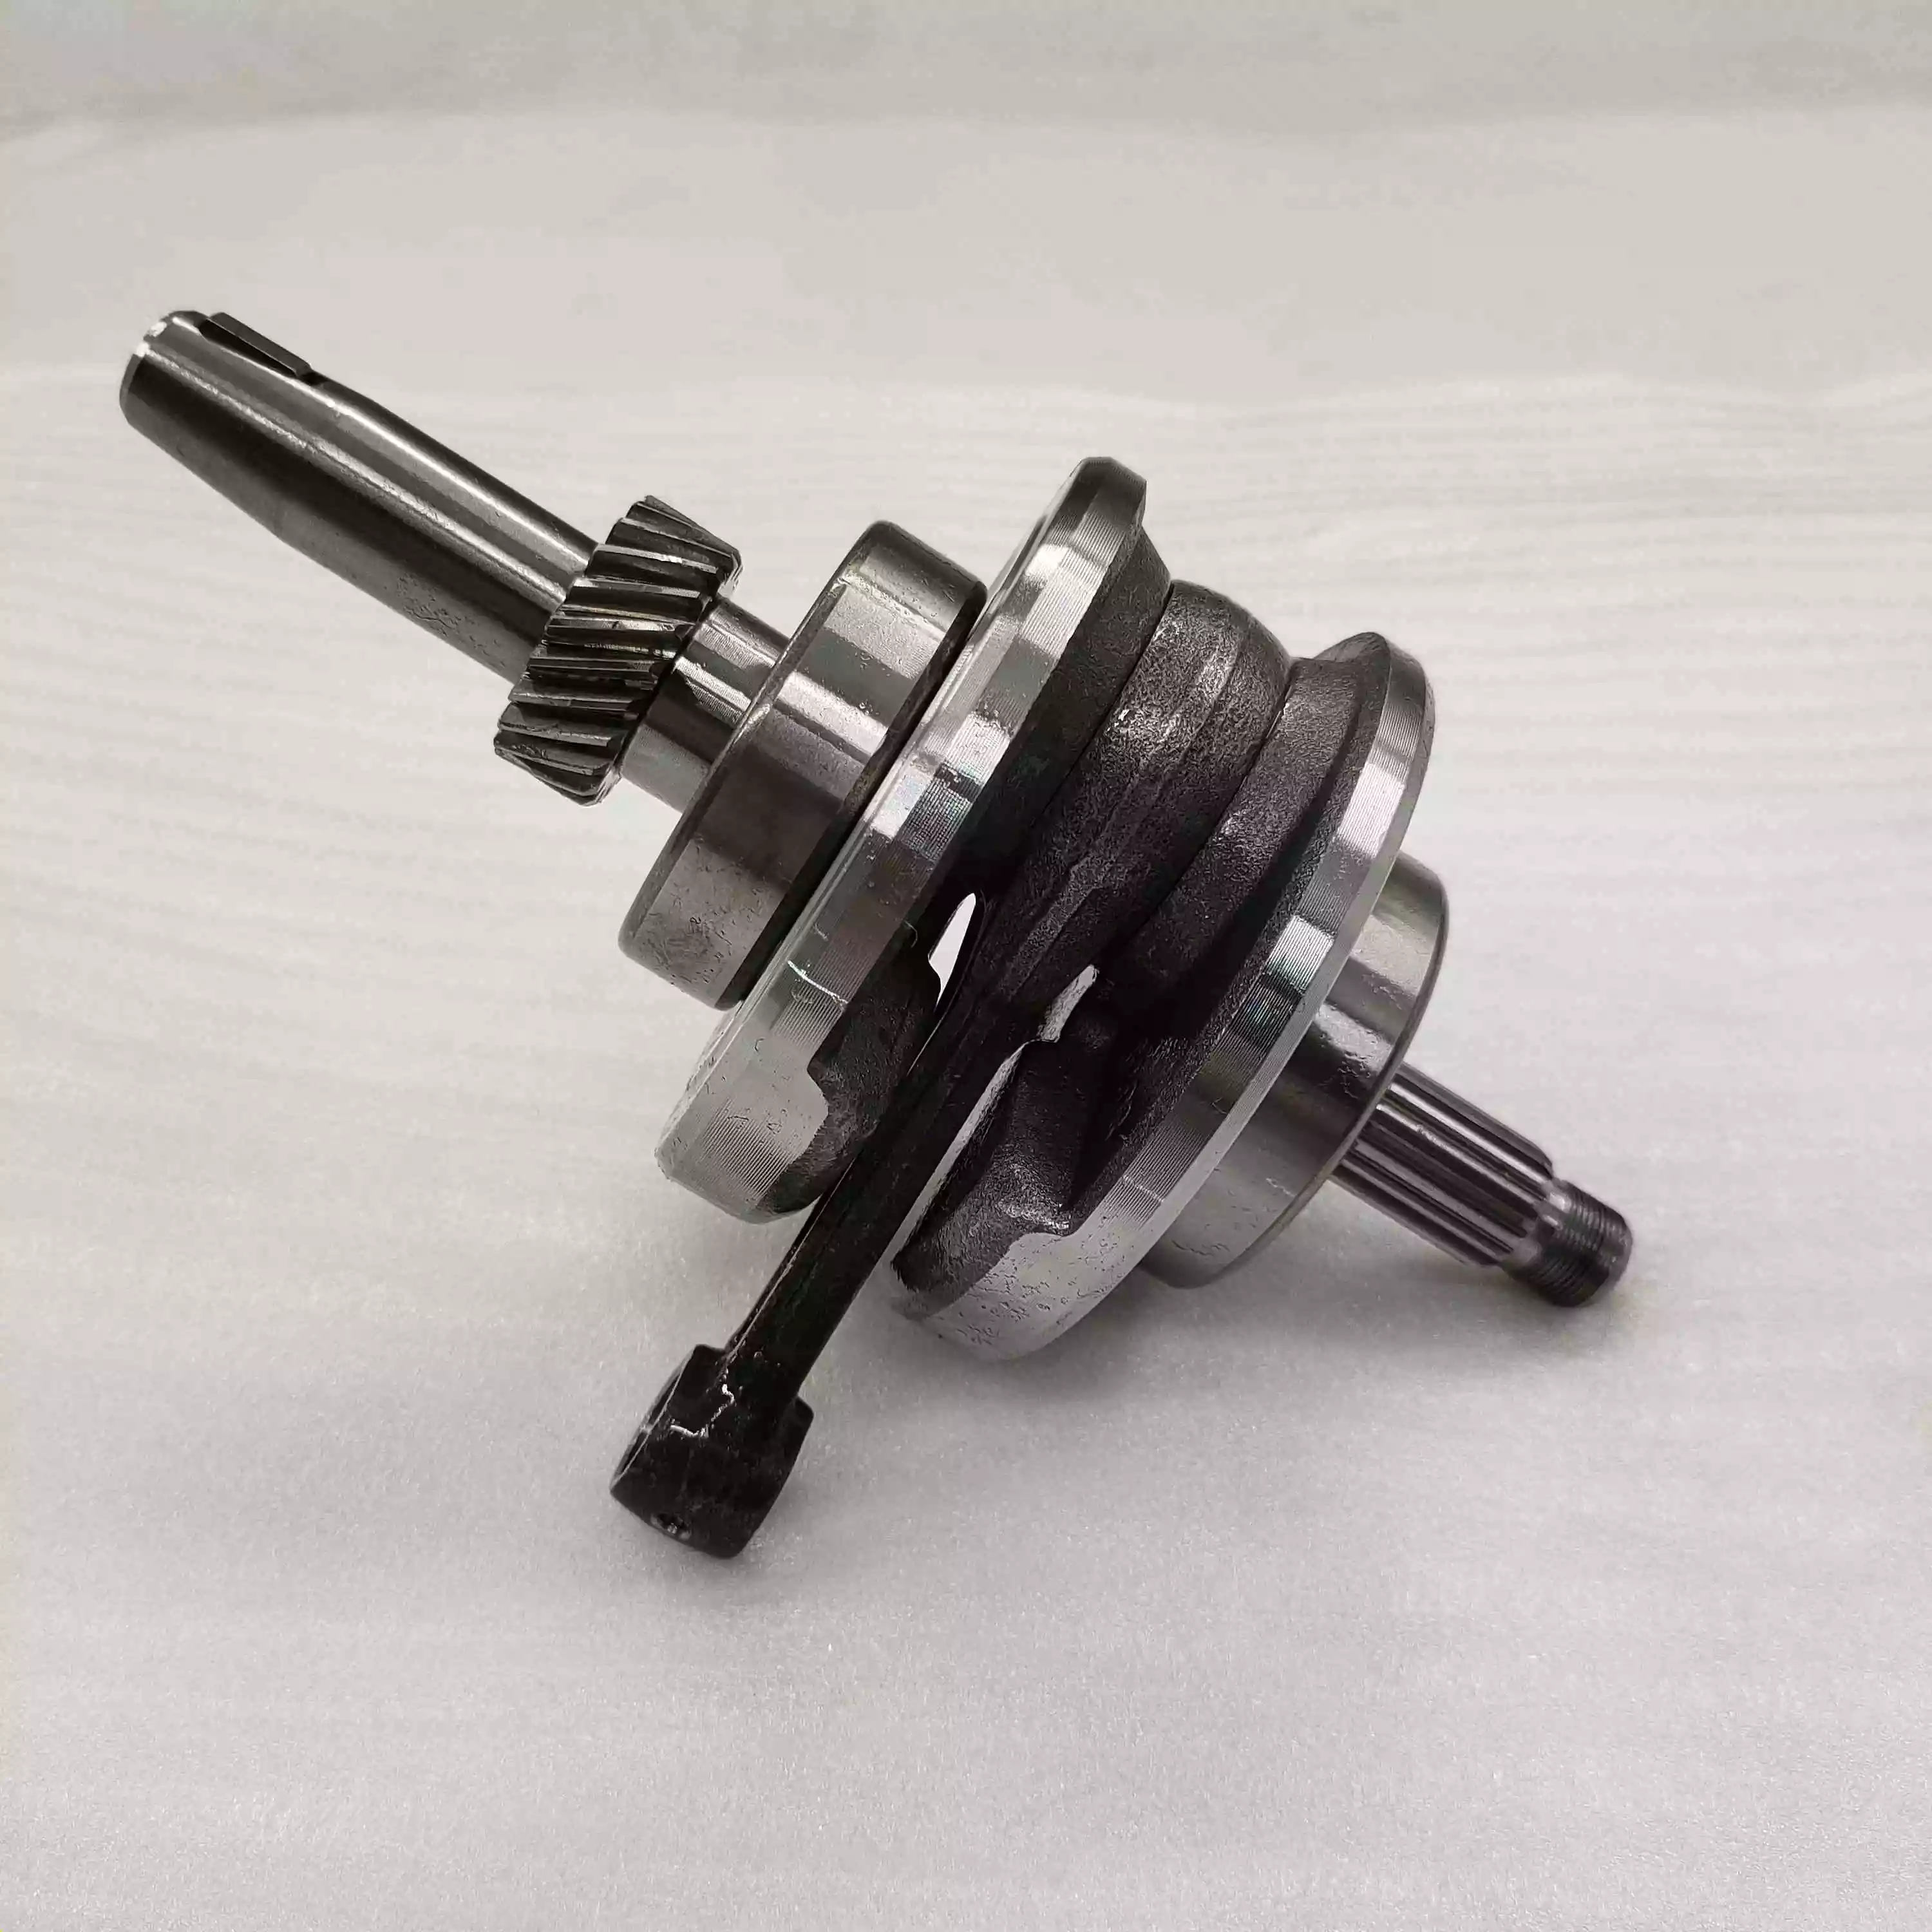 DAYANG factory new original motorcycle parts tricycle LIFAN 150cc air-cooled engine crankshaft high warranty product